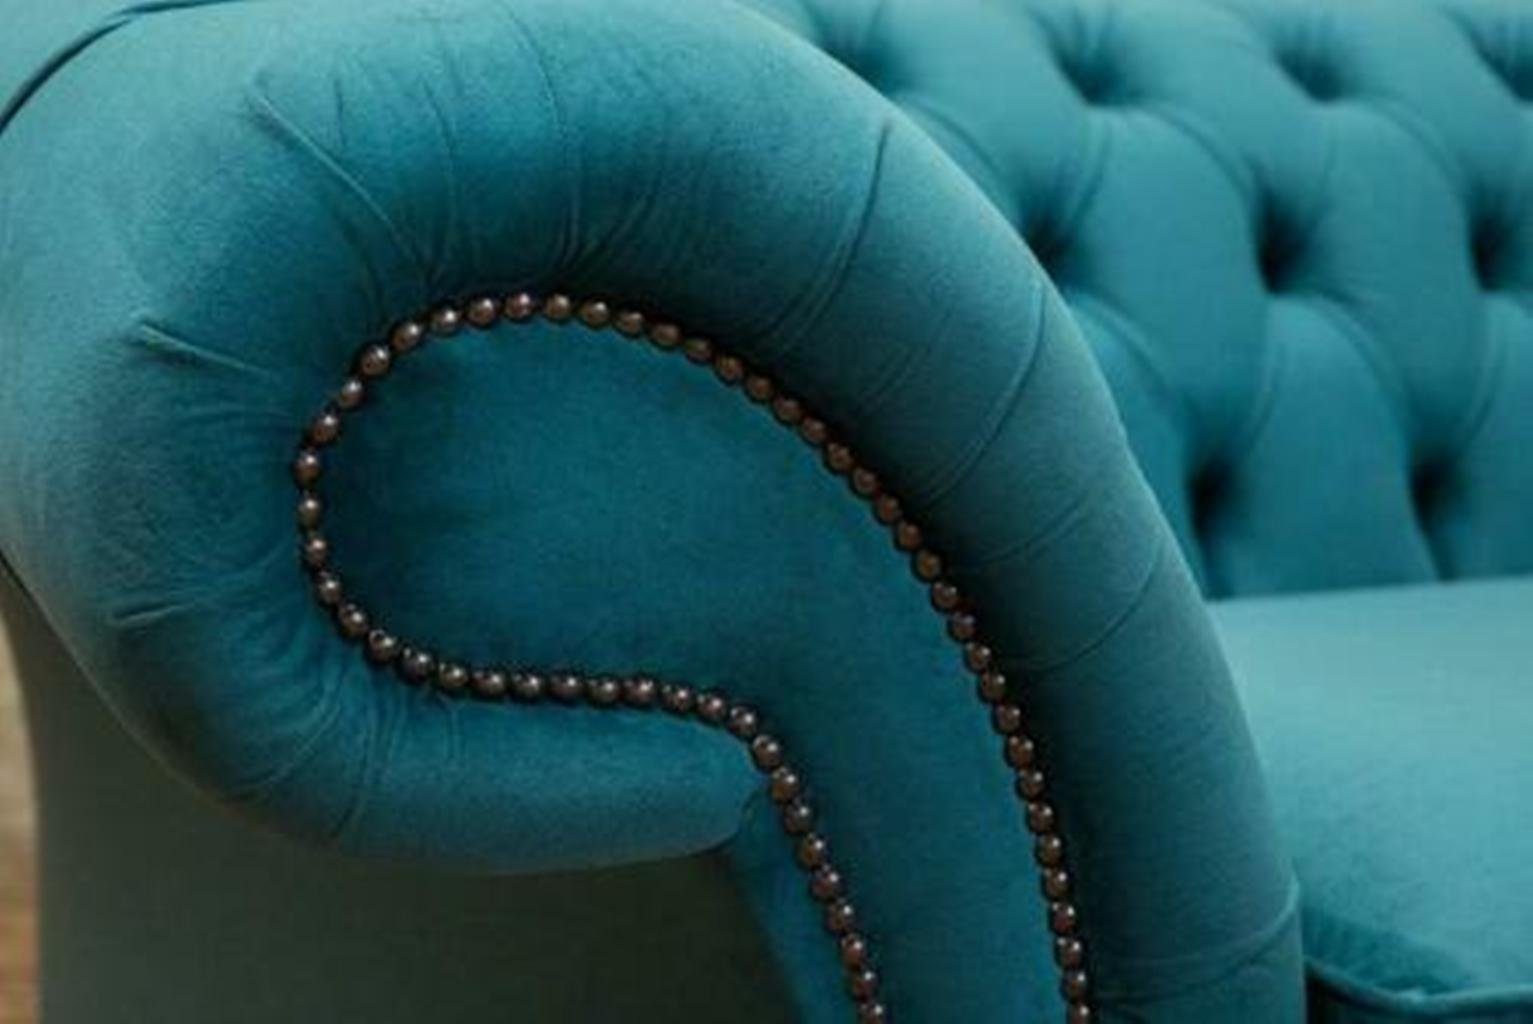 Sofa Stoff Textil Sitzer 3 Design Möbel Chesterfield JVmoebel Chesterfield-Sofa, Couch Edles